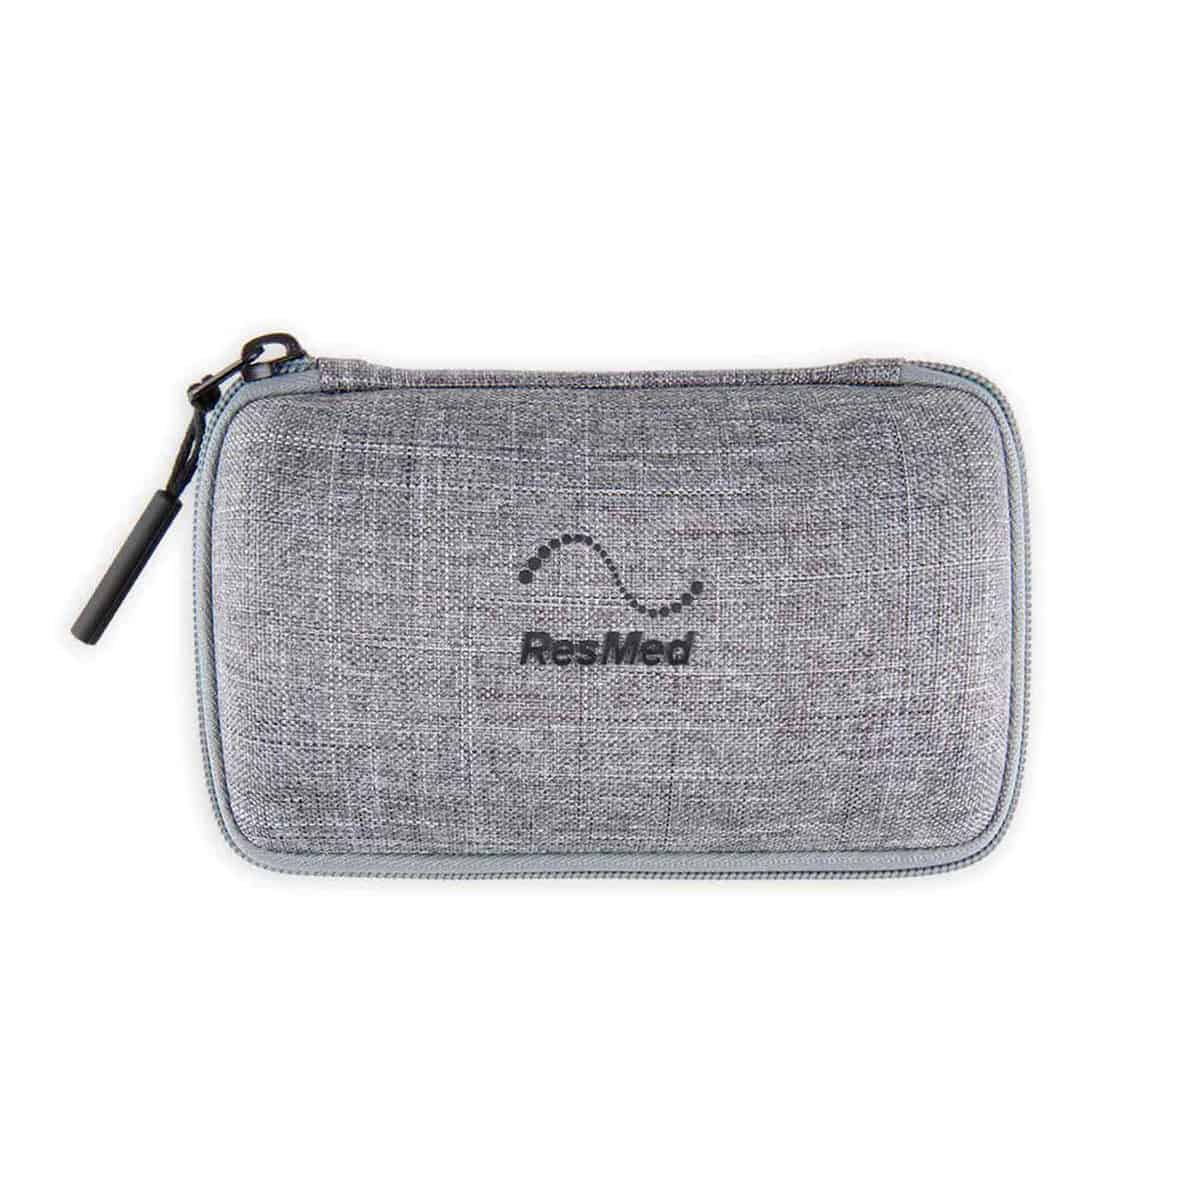 Featured image for “ResMed AirMini Travel Case”